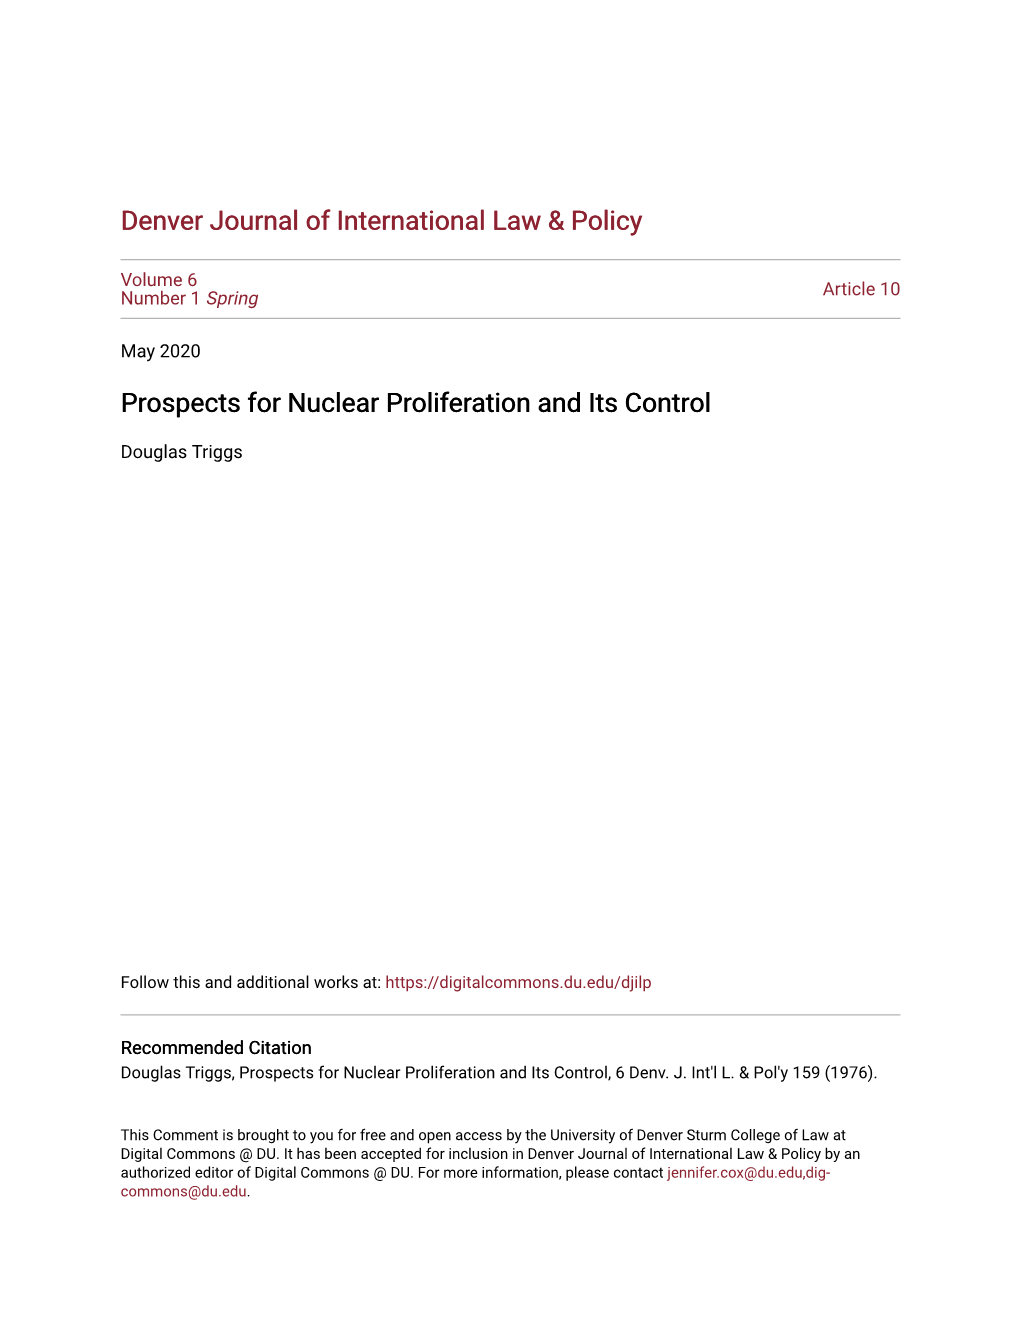 Prospects for Nuclear Proliferation and Its Control